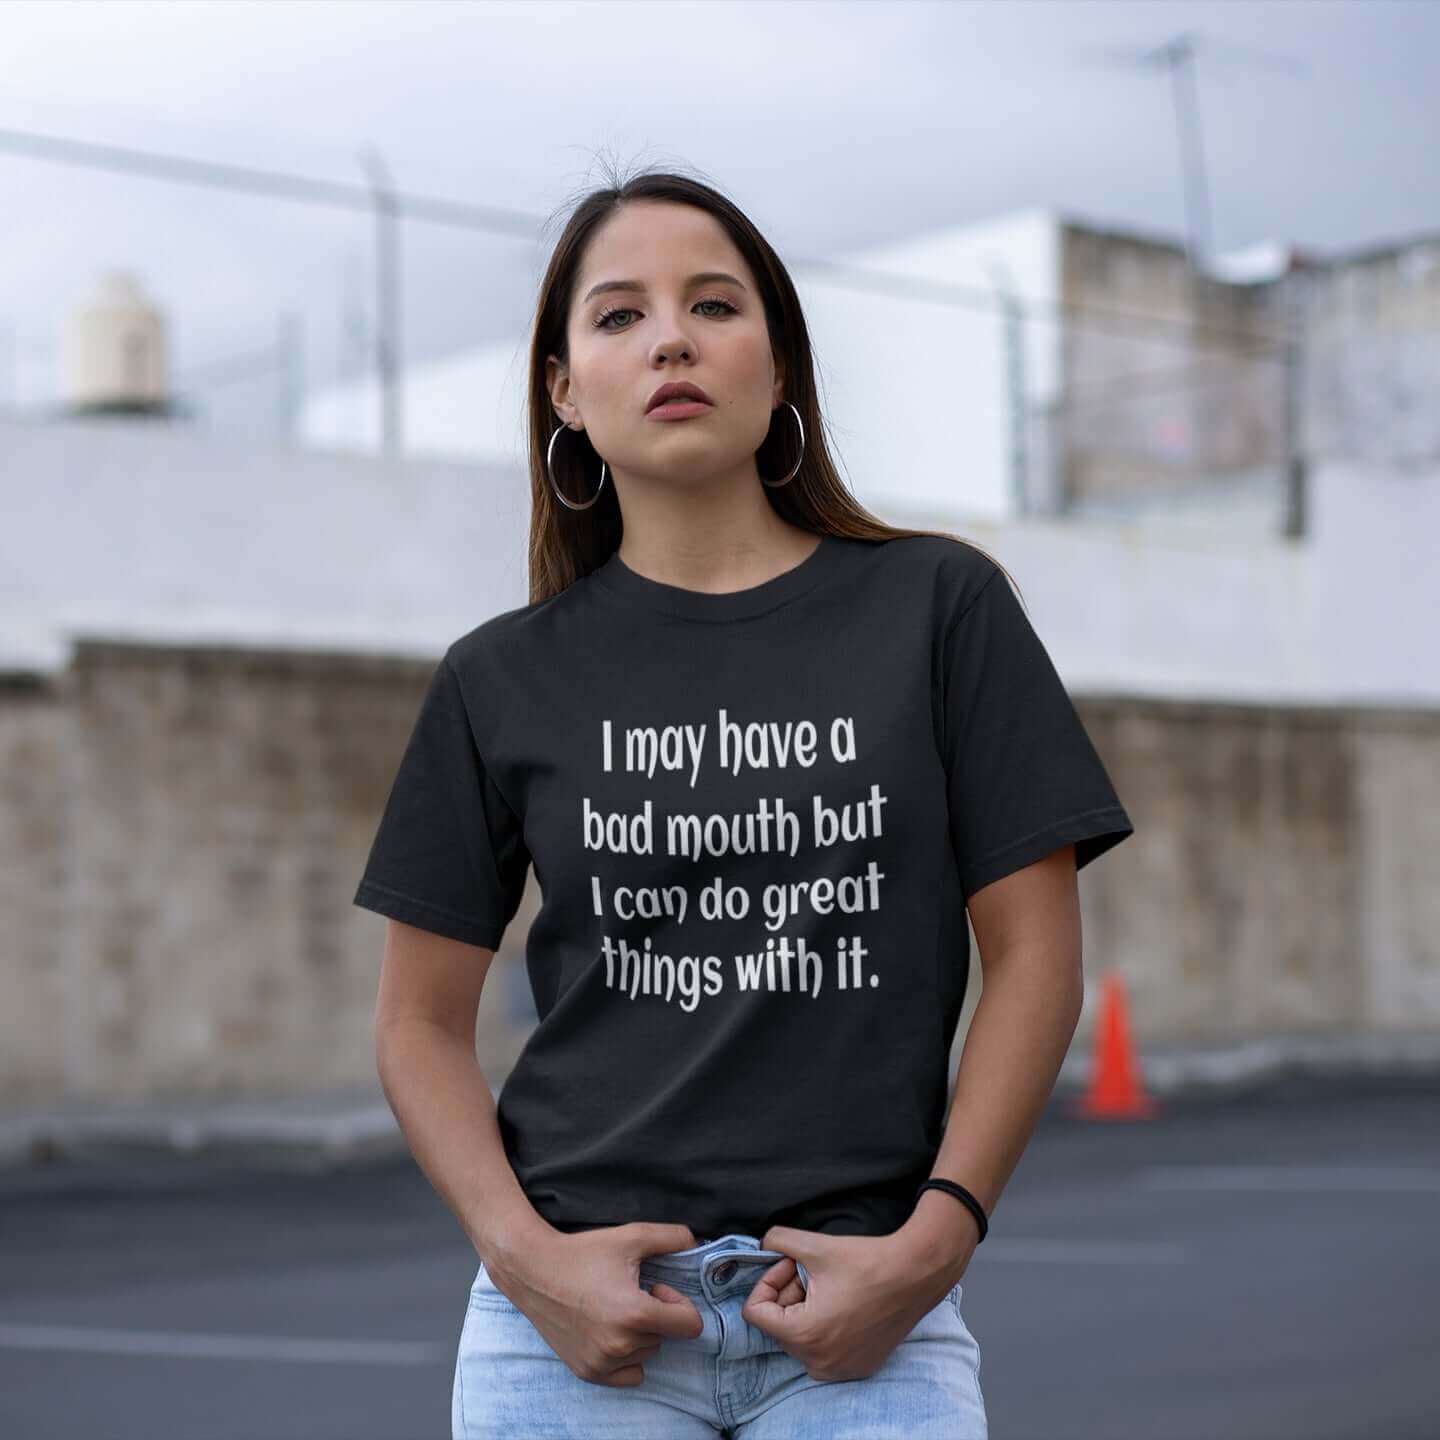 Woman wearing a black t-shirt with the phrase I may have a bad mouth but I can do great things with it printed on the front.